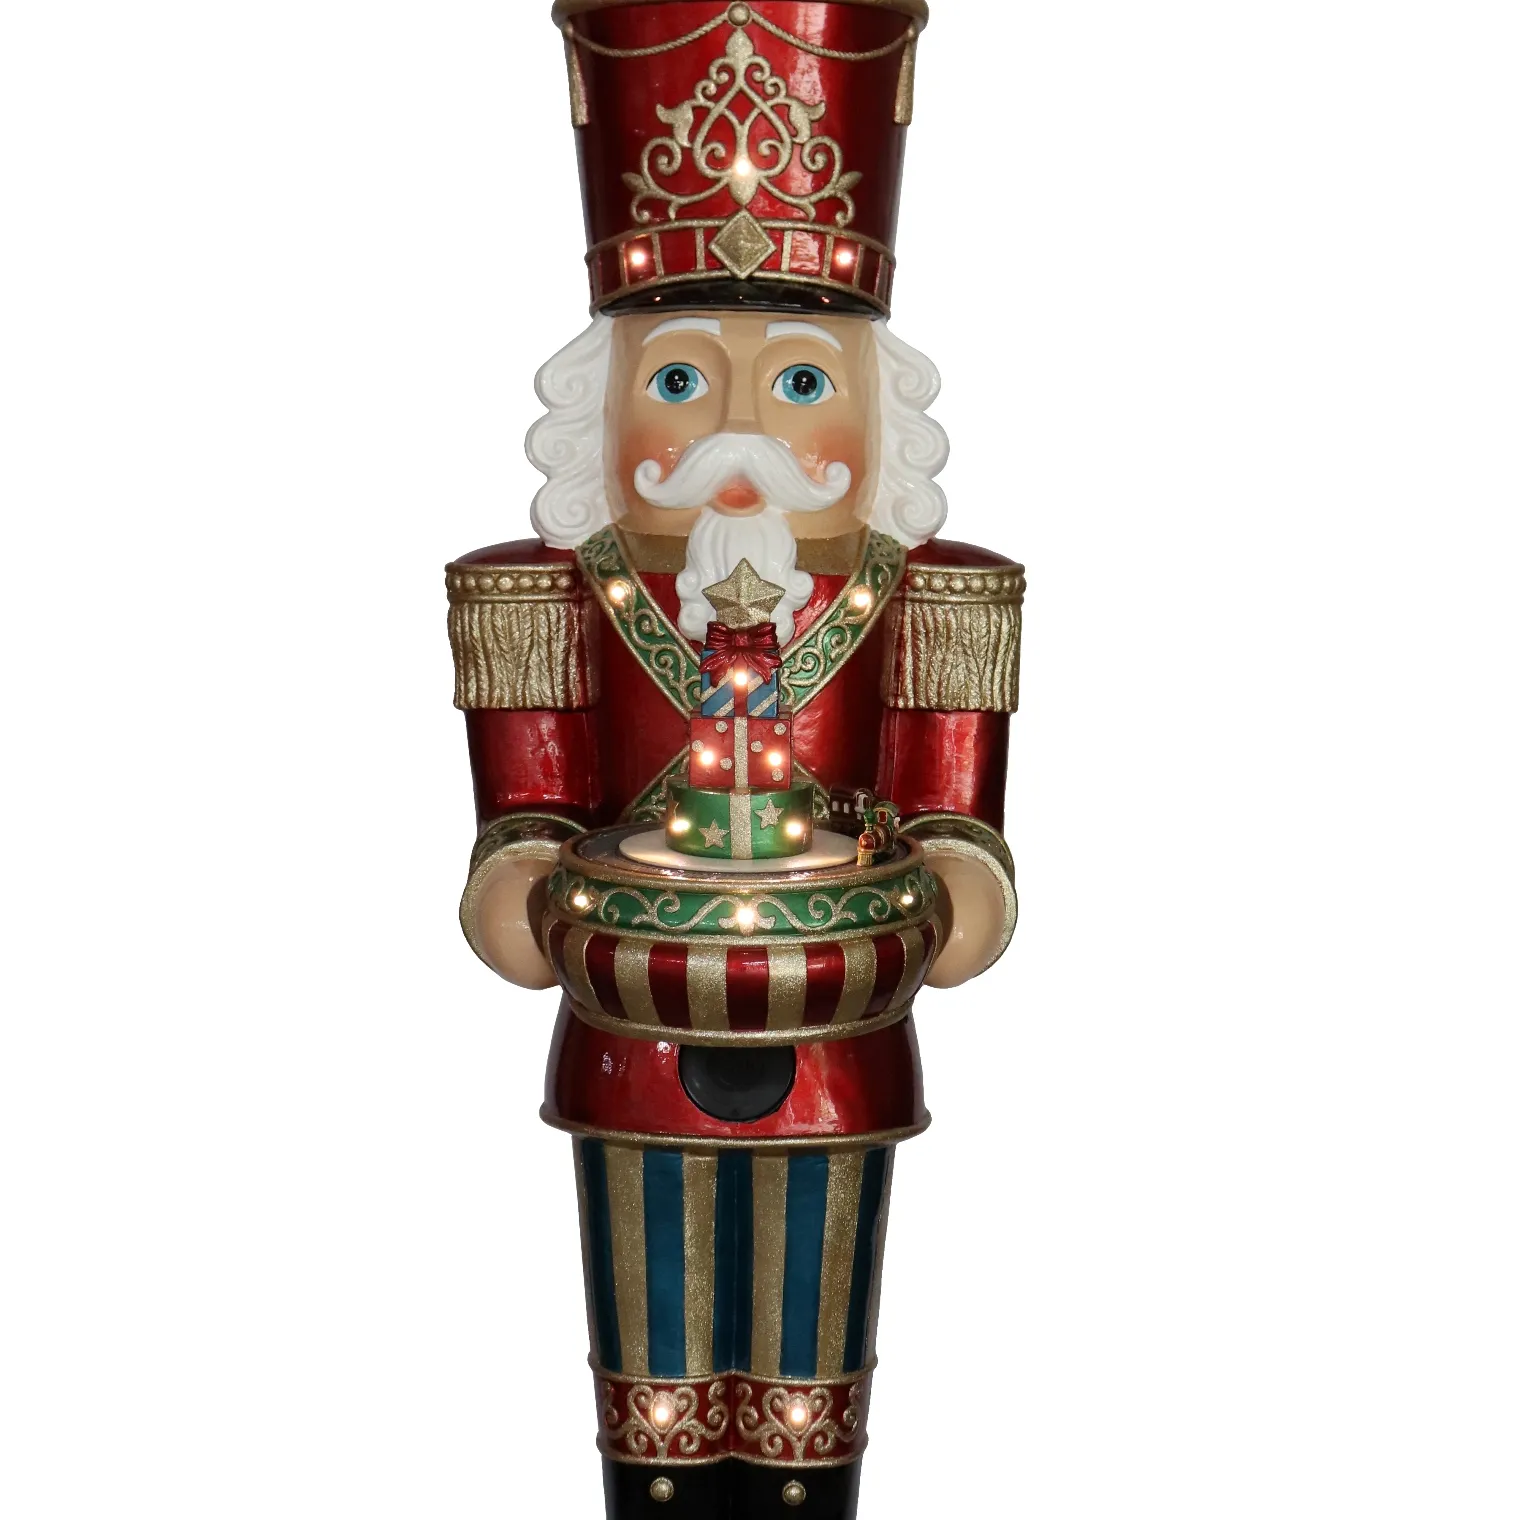 animated resin art crafts giant ornaments life size Christmas nutcracker soldier with christmas trees lights music decorations